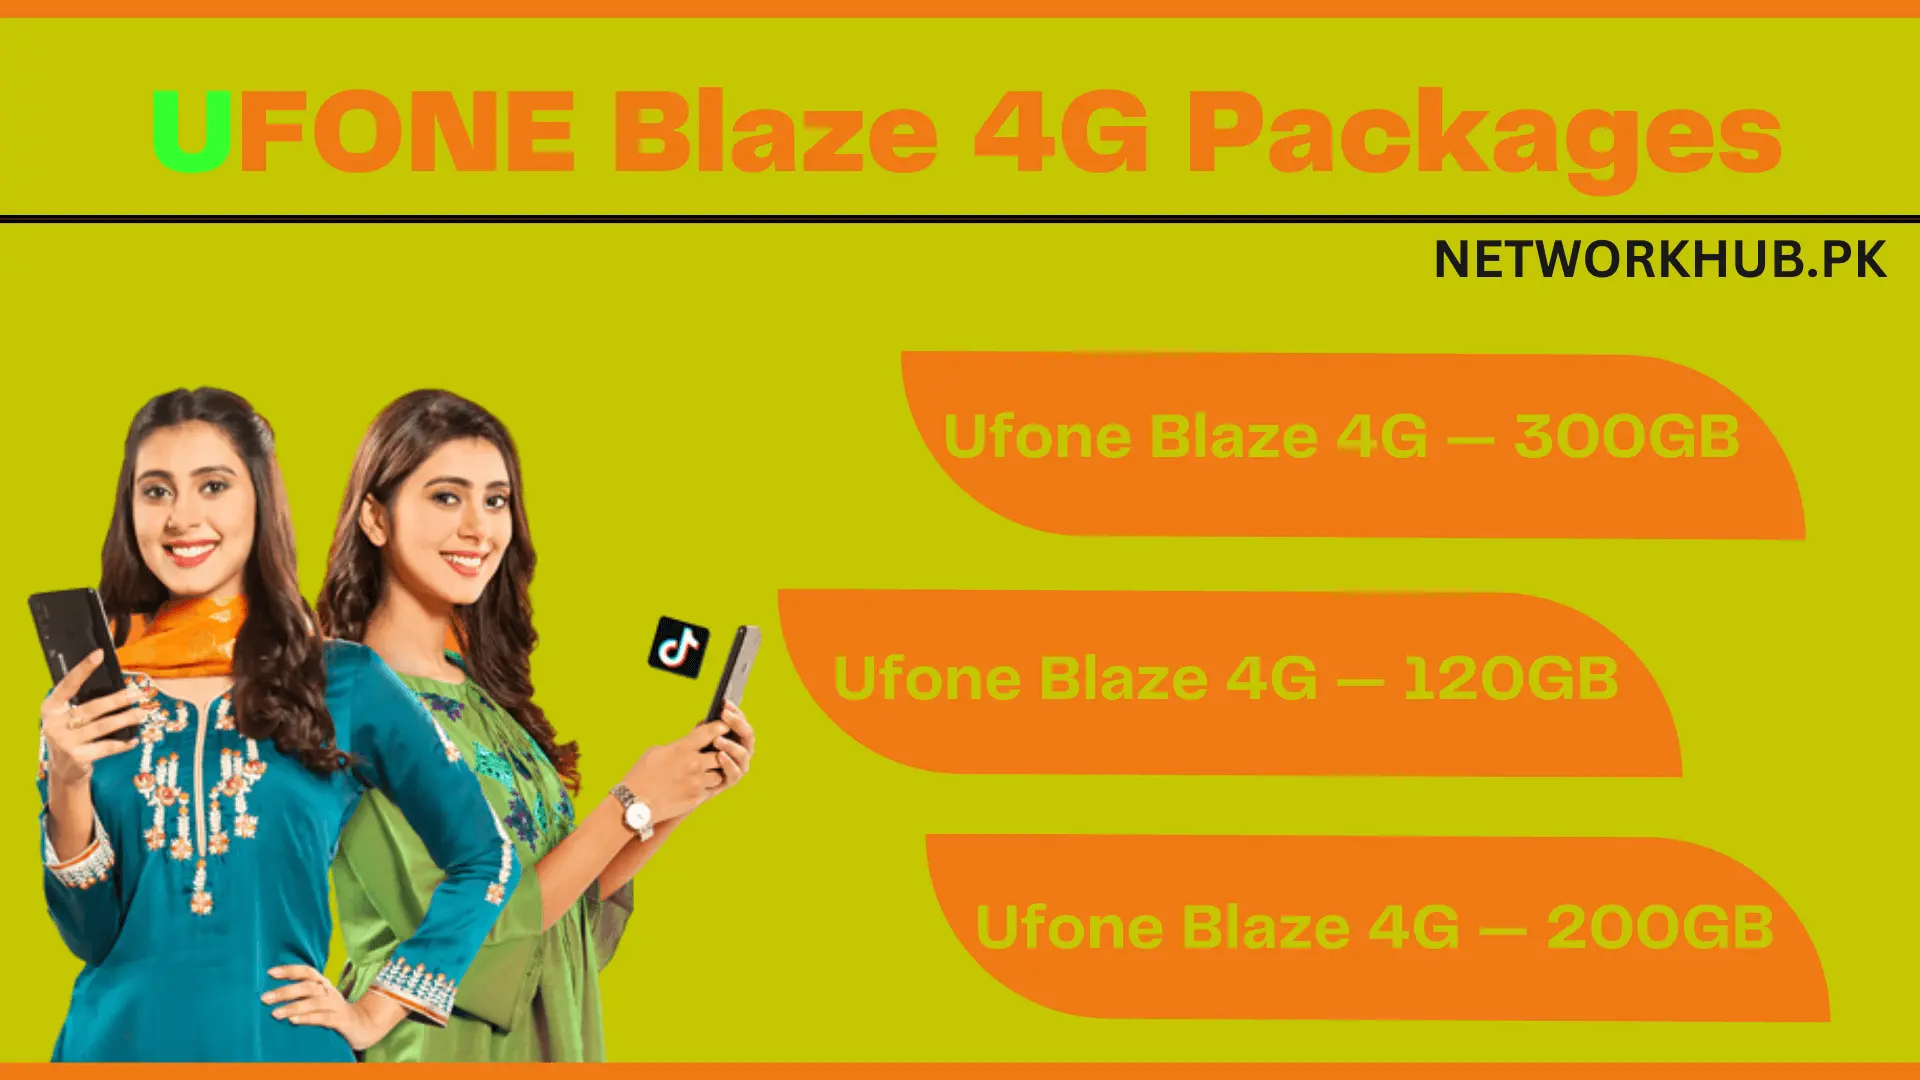 Ufone Blaze 4G Packages